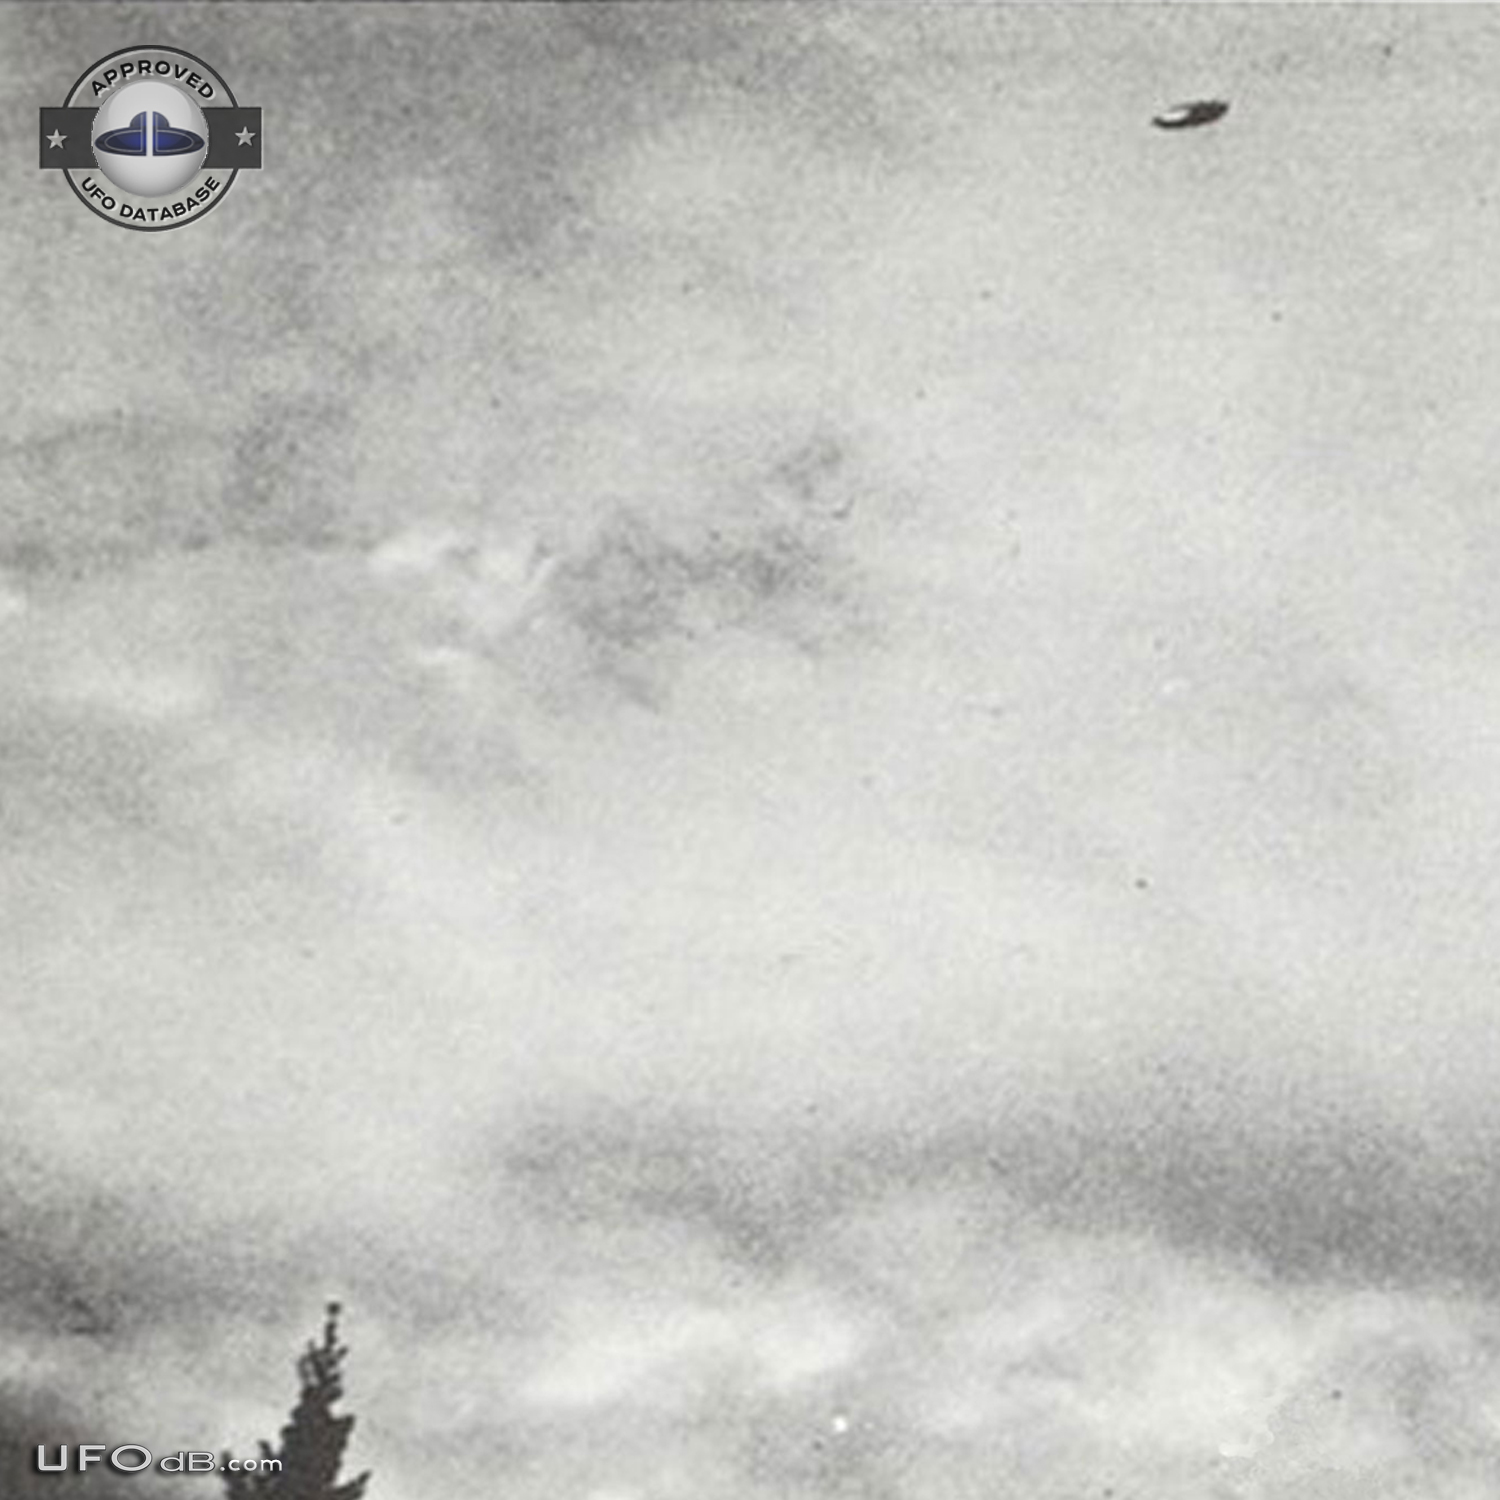 1967 Calgary UFO picture considered to be in the top 10 of all times UFO Picture #448-2